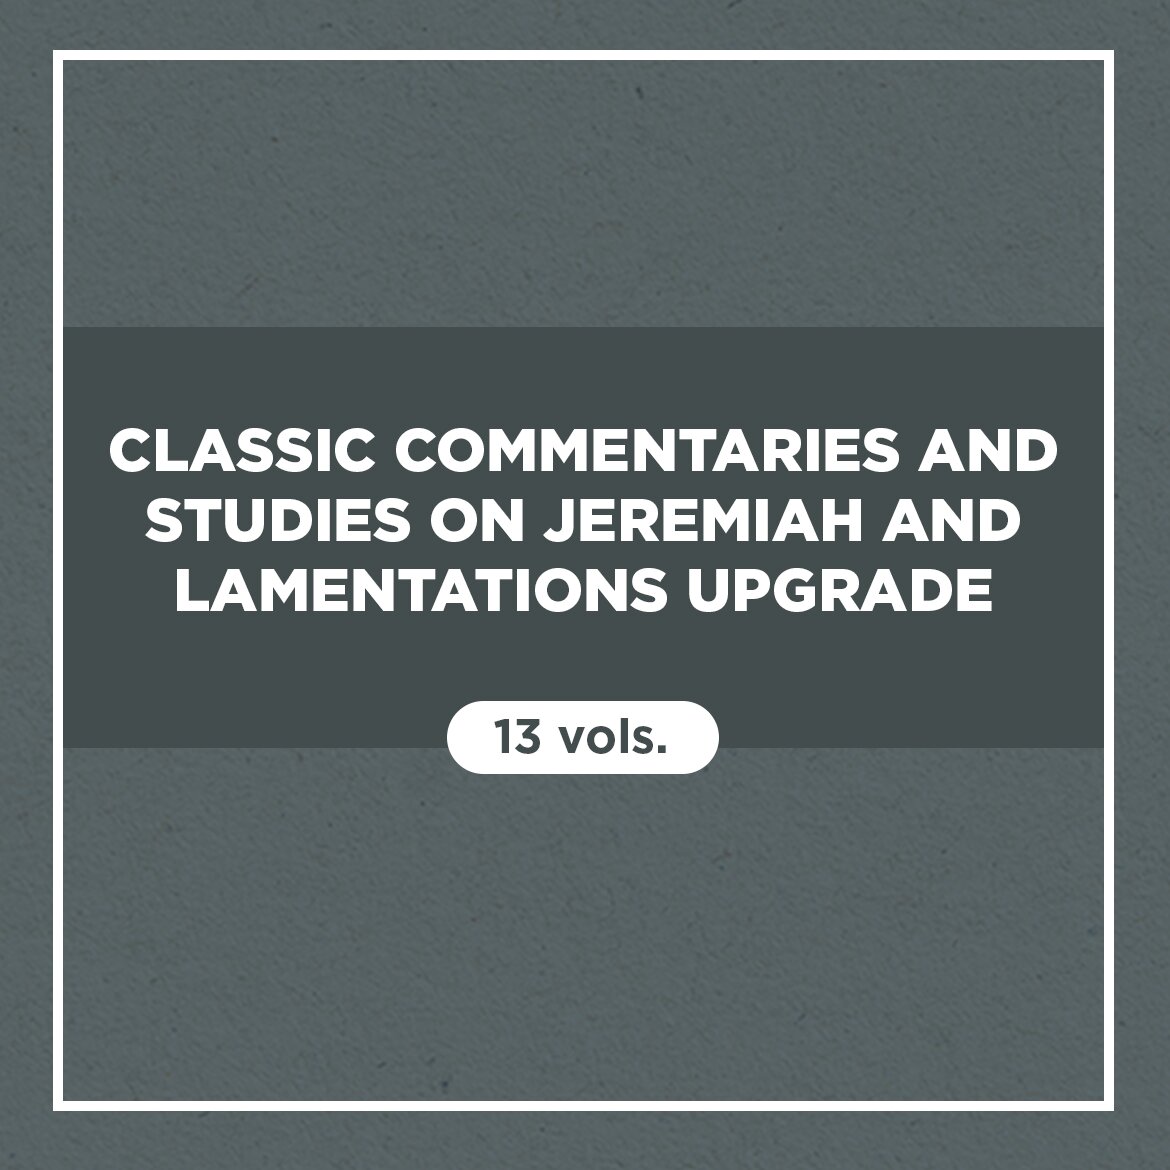 Classic Commentaries and Studies on Jeremiah and Lamentations Upgrade (13 vols.)